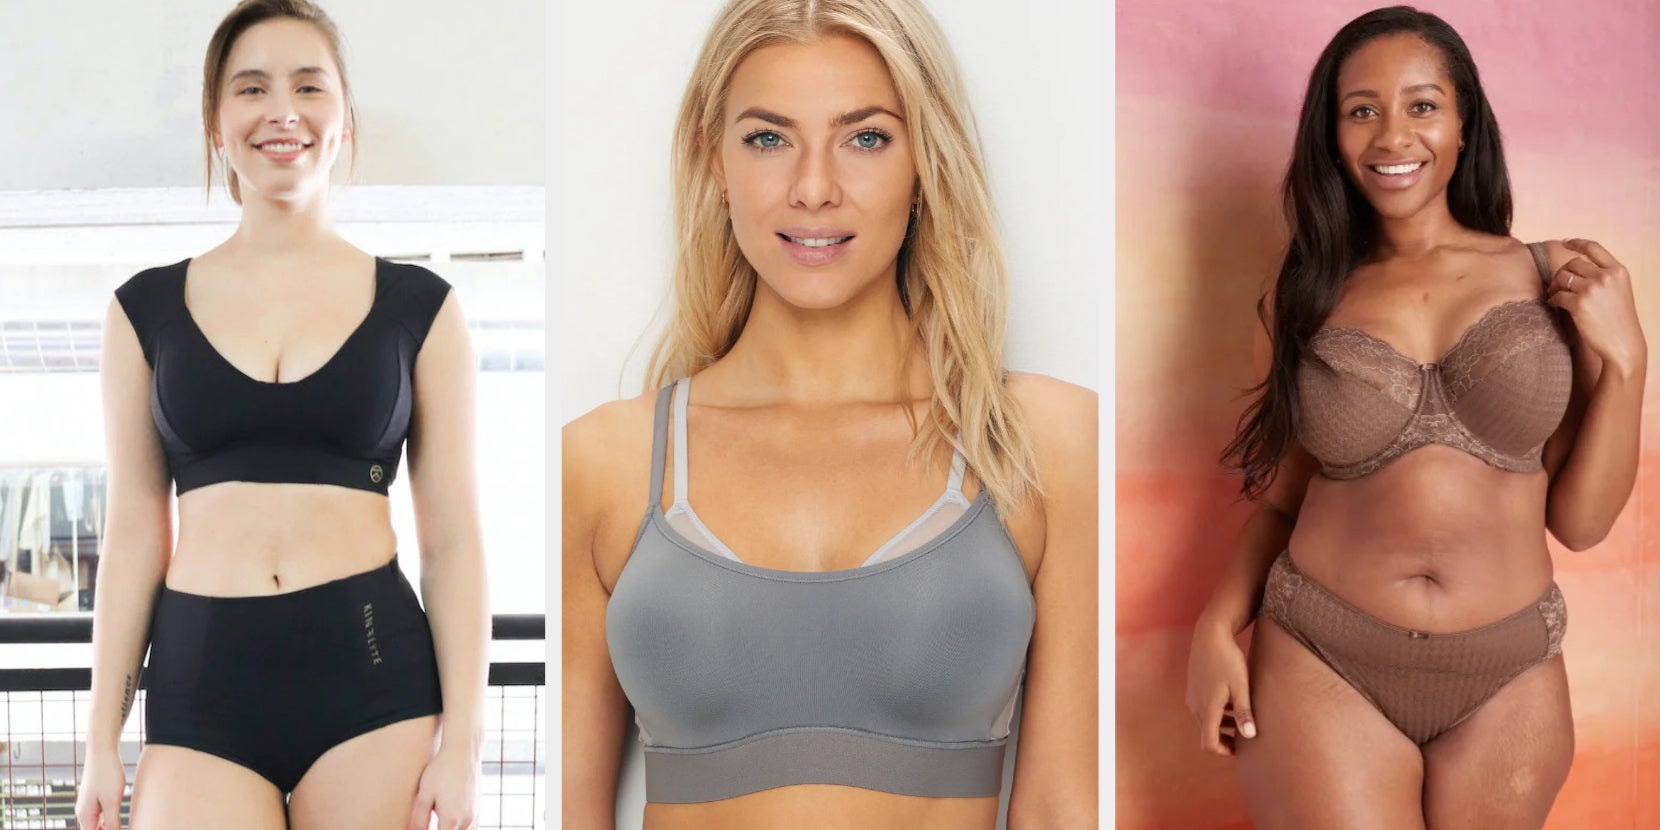 Thousands of Nordstrom shoppers say $68 bra is the 'best bra ever